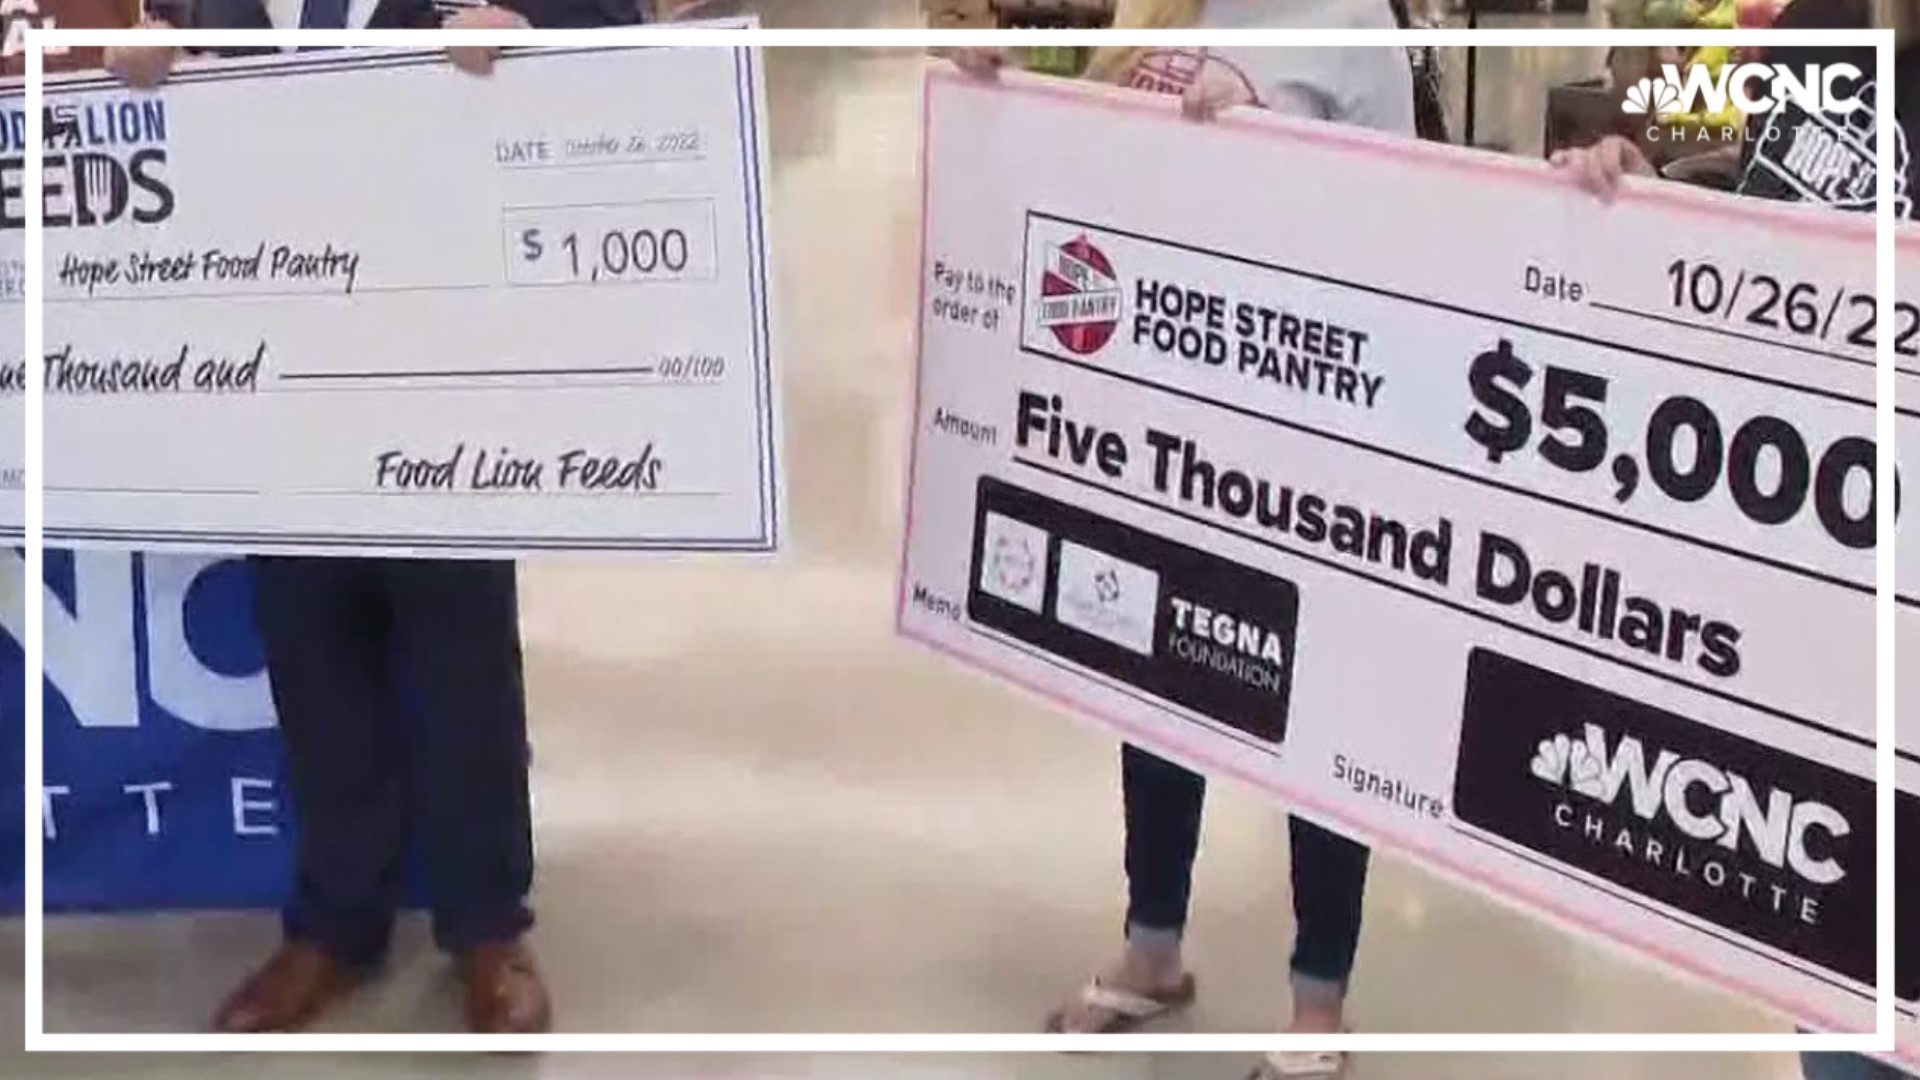 WCNC Charlotte, the TEGNA Foundation, Steel Skin Realty and the Parham Family Charitable Fund have donated $5,000 to Hope Street Food Pantry.